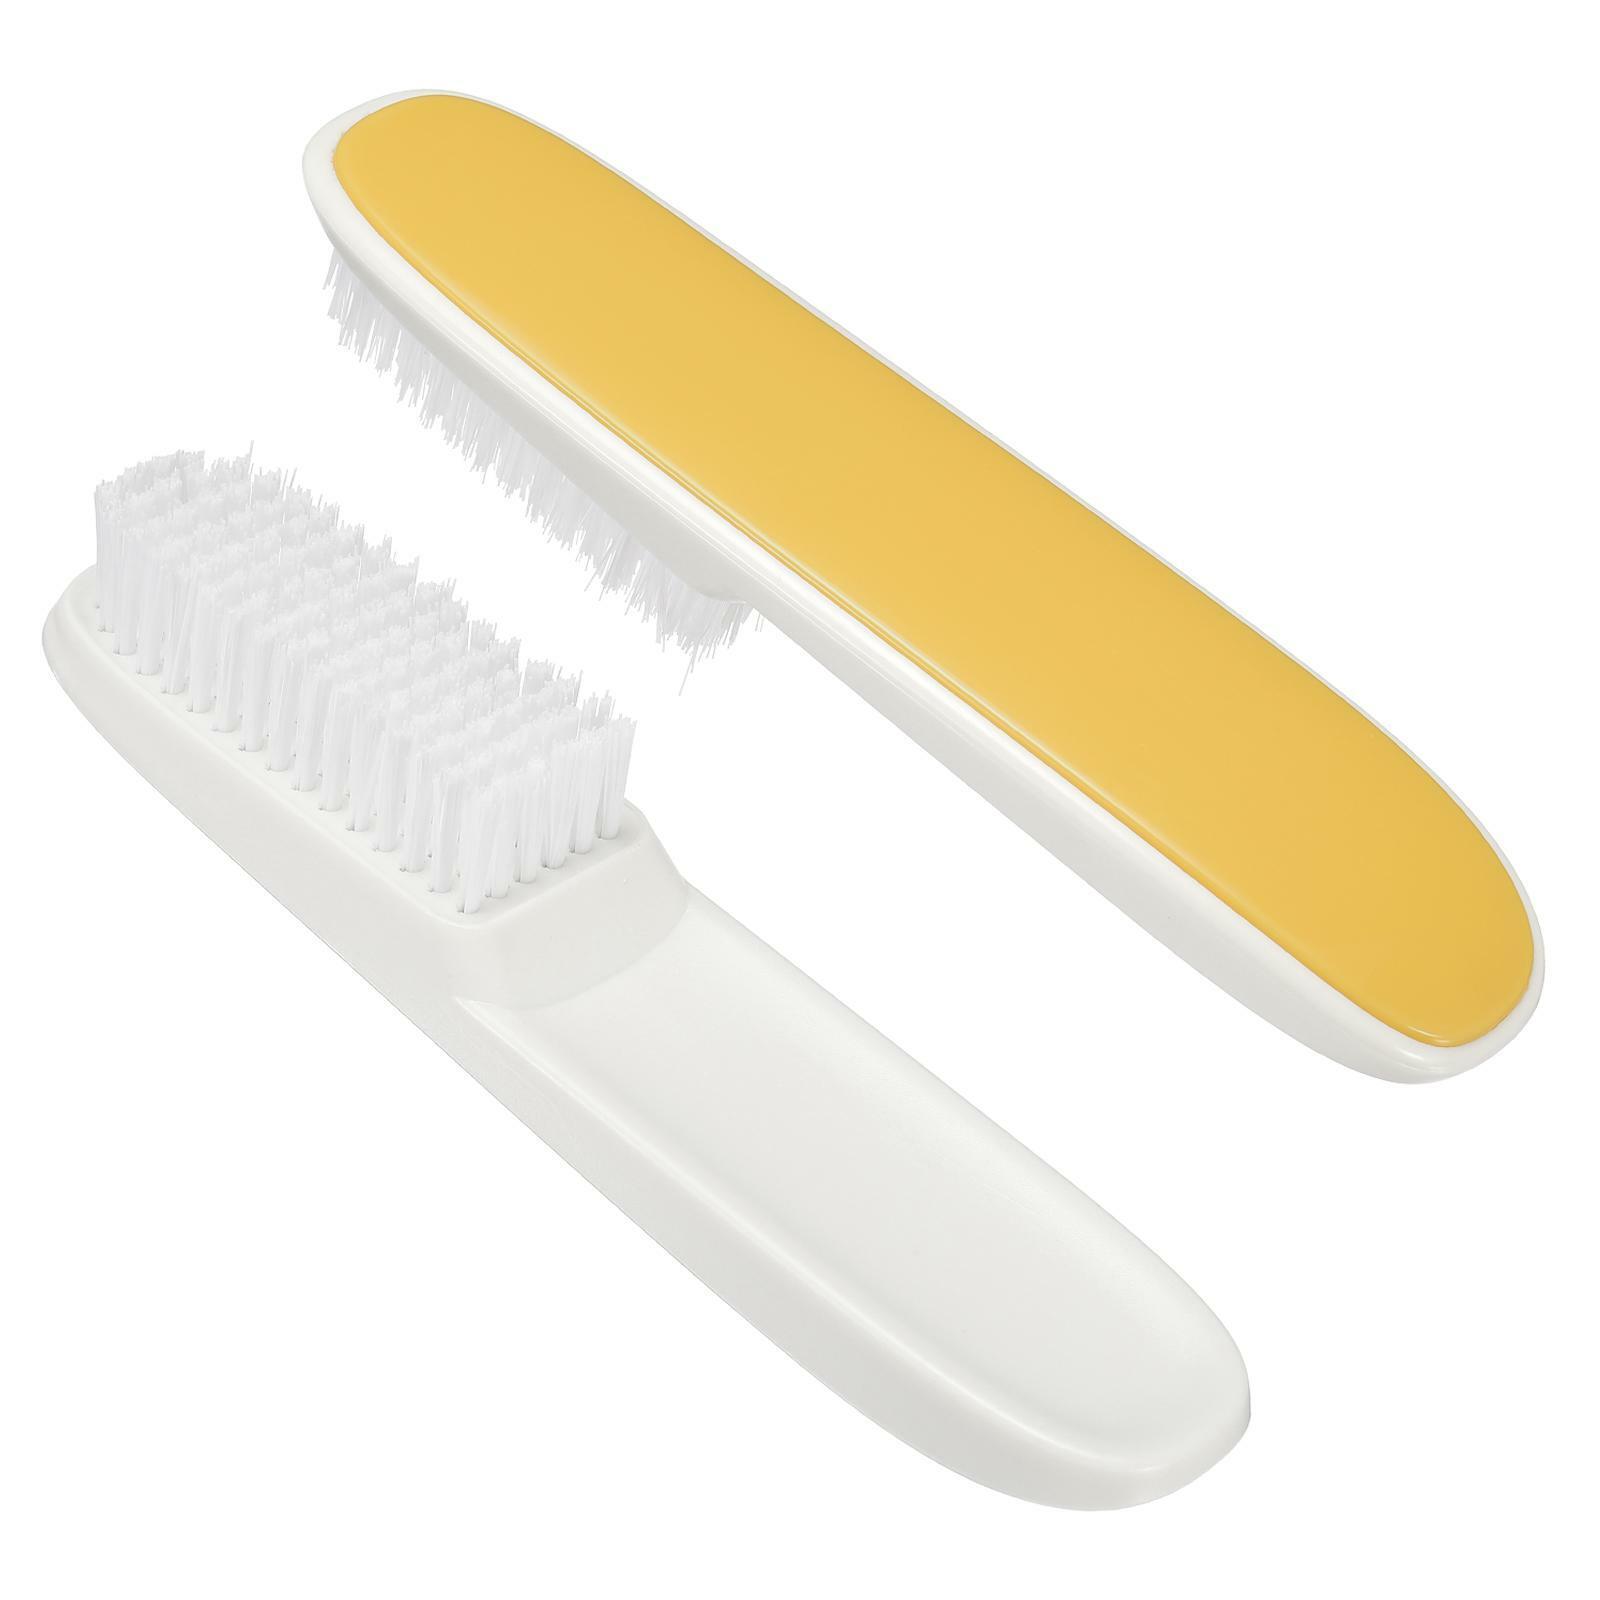 2pcs Cleaning Brush Pbt Bristles + Abs Handle For Shoes Sneakers Clothes Yellow